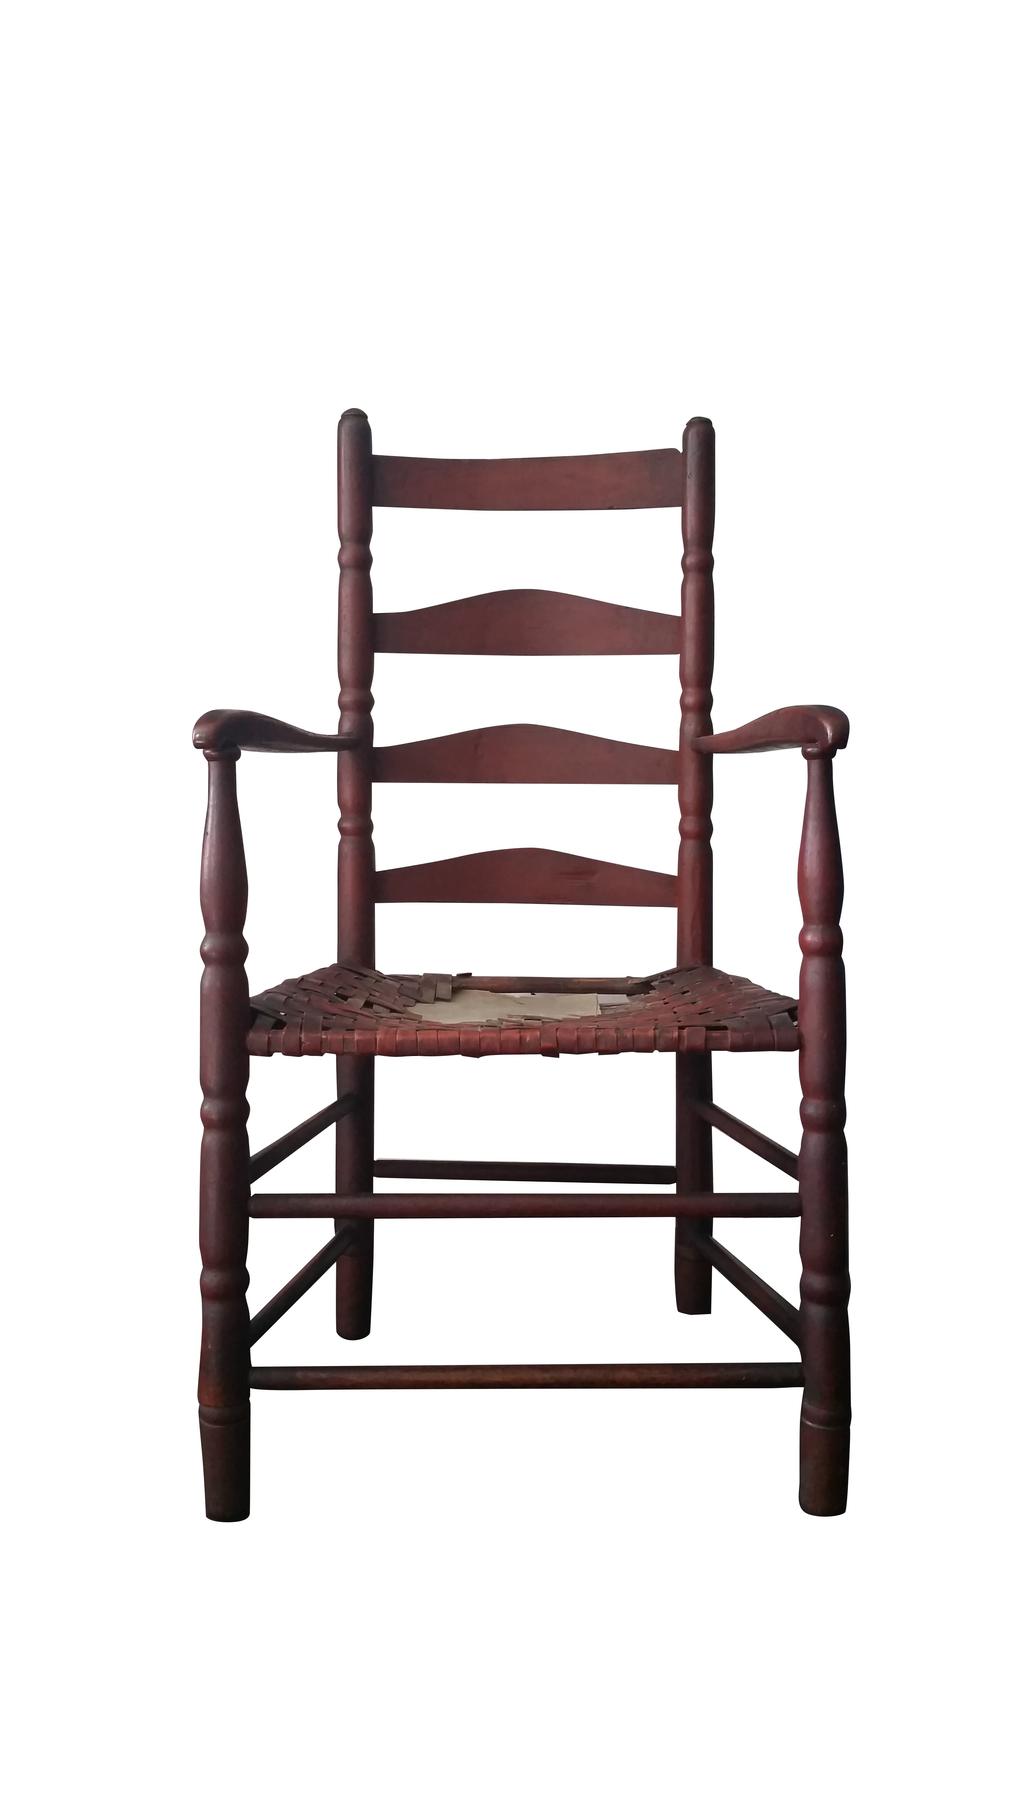 George Washington Chair 1789 During his visit to the Lexington Battle Green on November 5, 1789, President George Washington dined